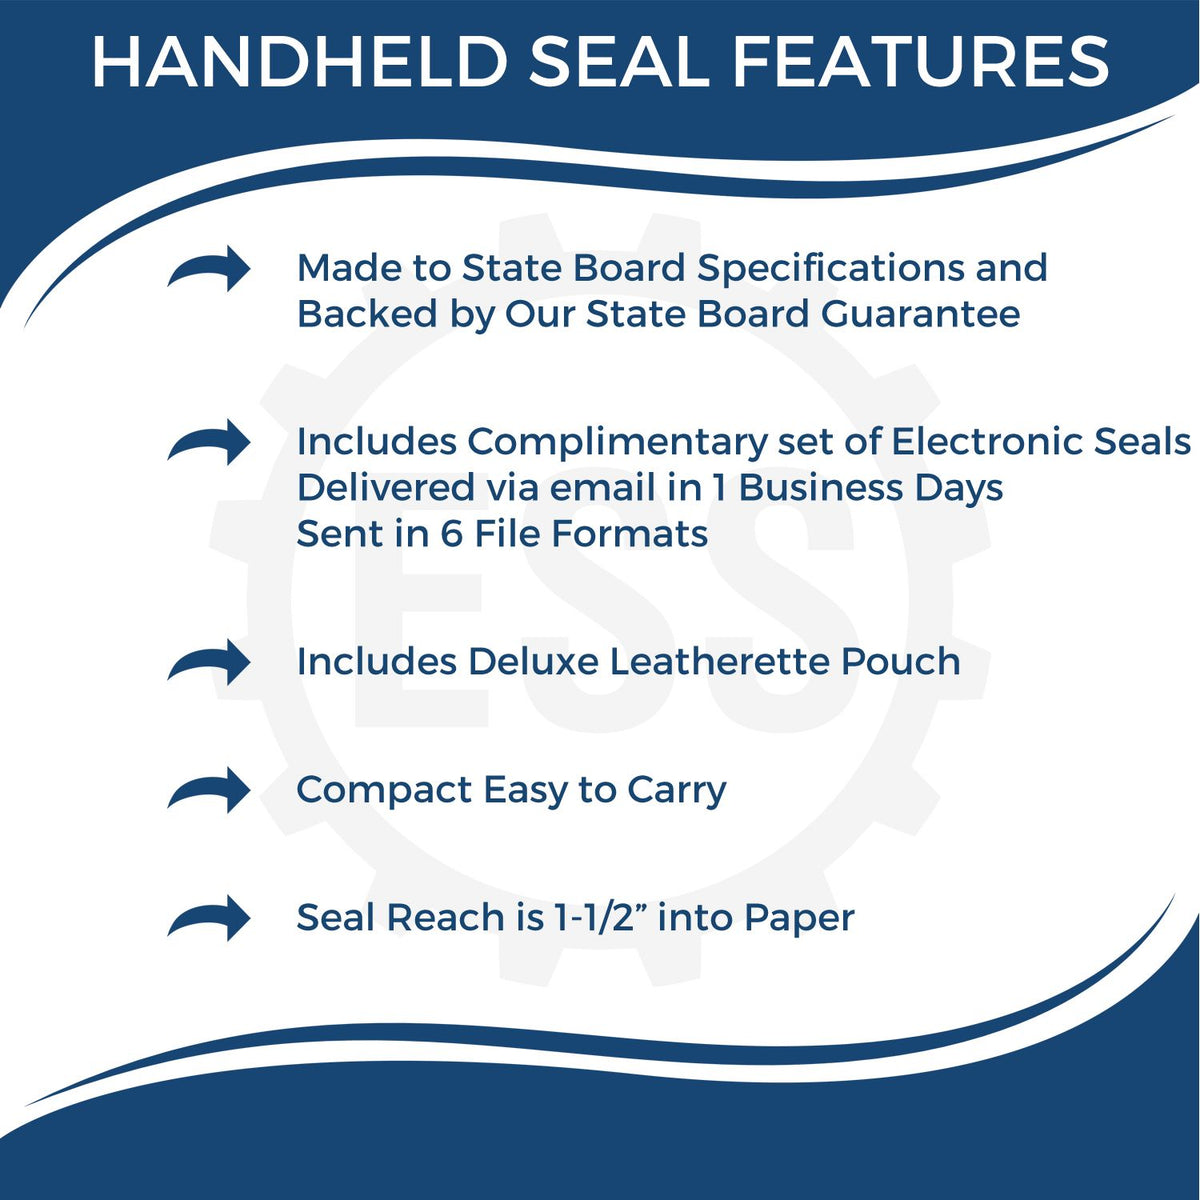 A picture of an infographic highlighting the selling points for the Handheld Nebraska Land Surveyor Seal